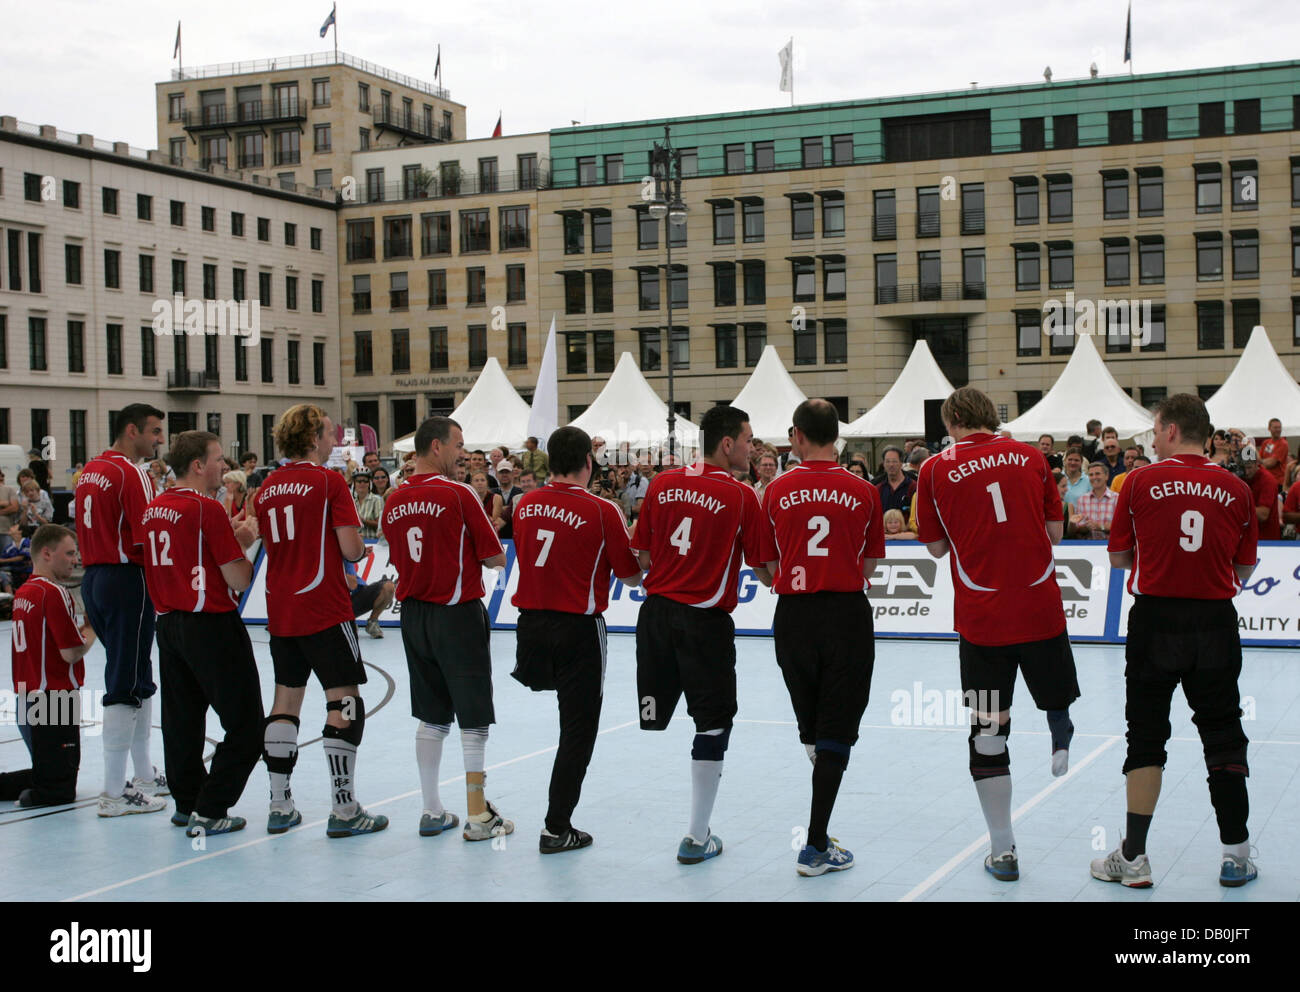 (dpa file) - The German national team is pictured prior to their sitting volleyball match against the national team of Bosnia-Herzegovina during the Paralympic Day at the Brandenburg Gate in Berlin, 23 August 2007. A year prior to the Paralympic Games in Beijing the 3rd Paralympic Day takes place in Berlin. Photo: Rainer Jensen Stock Photo